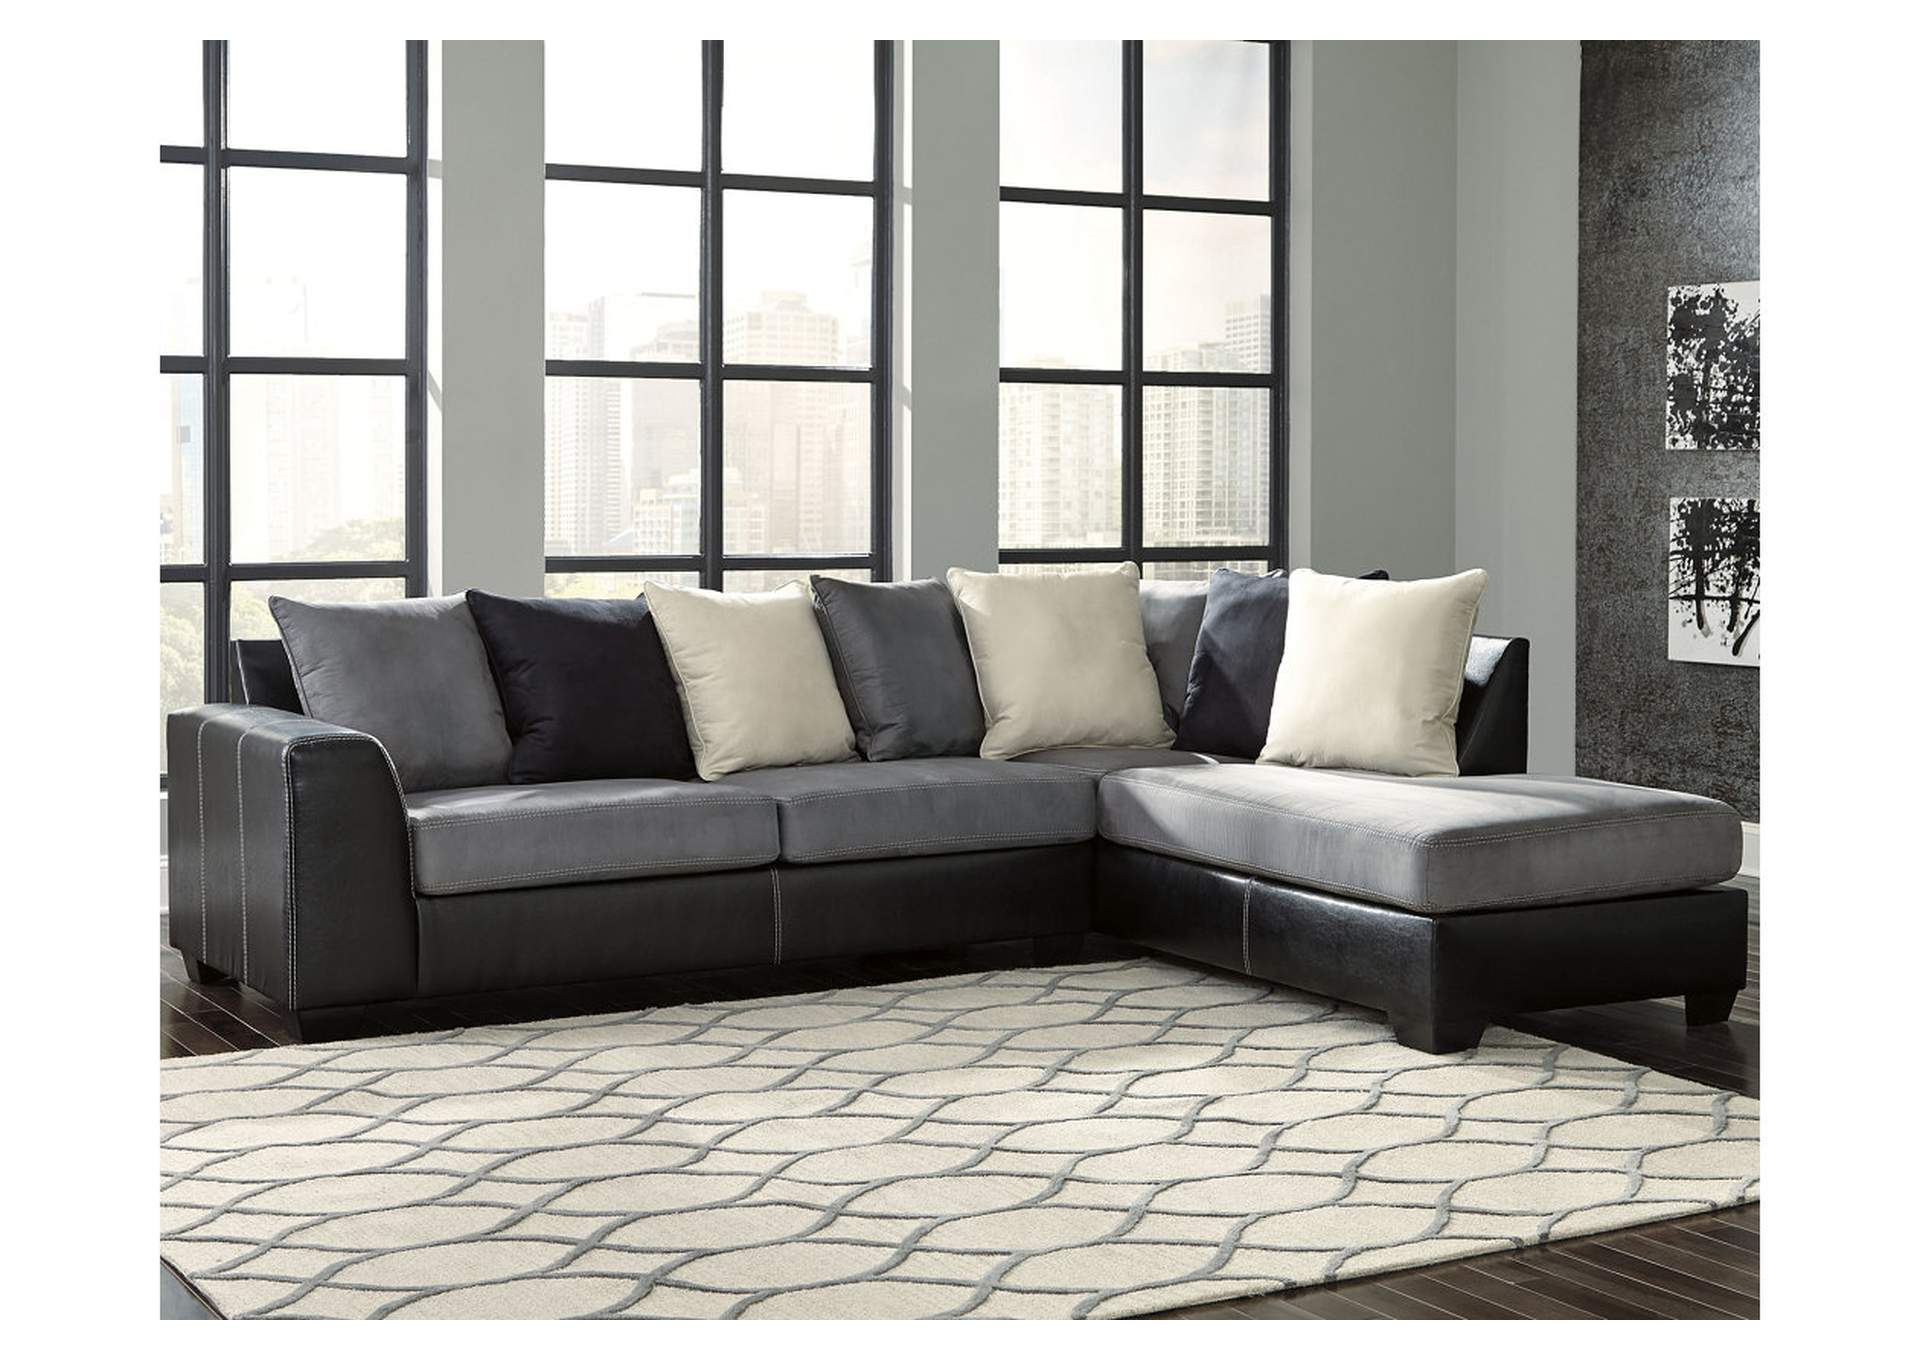 Jacurso 2-Piece Sectional with Chaise,Signature Design By Ashley